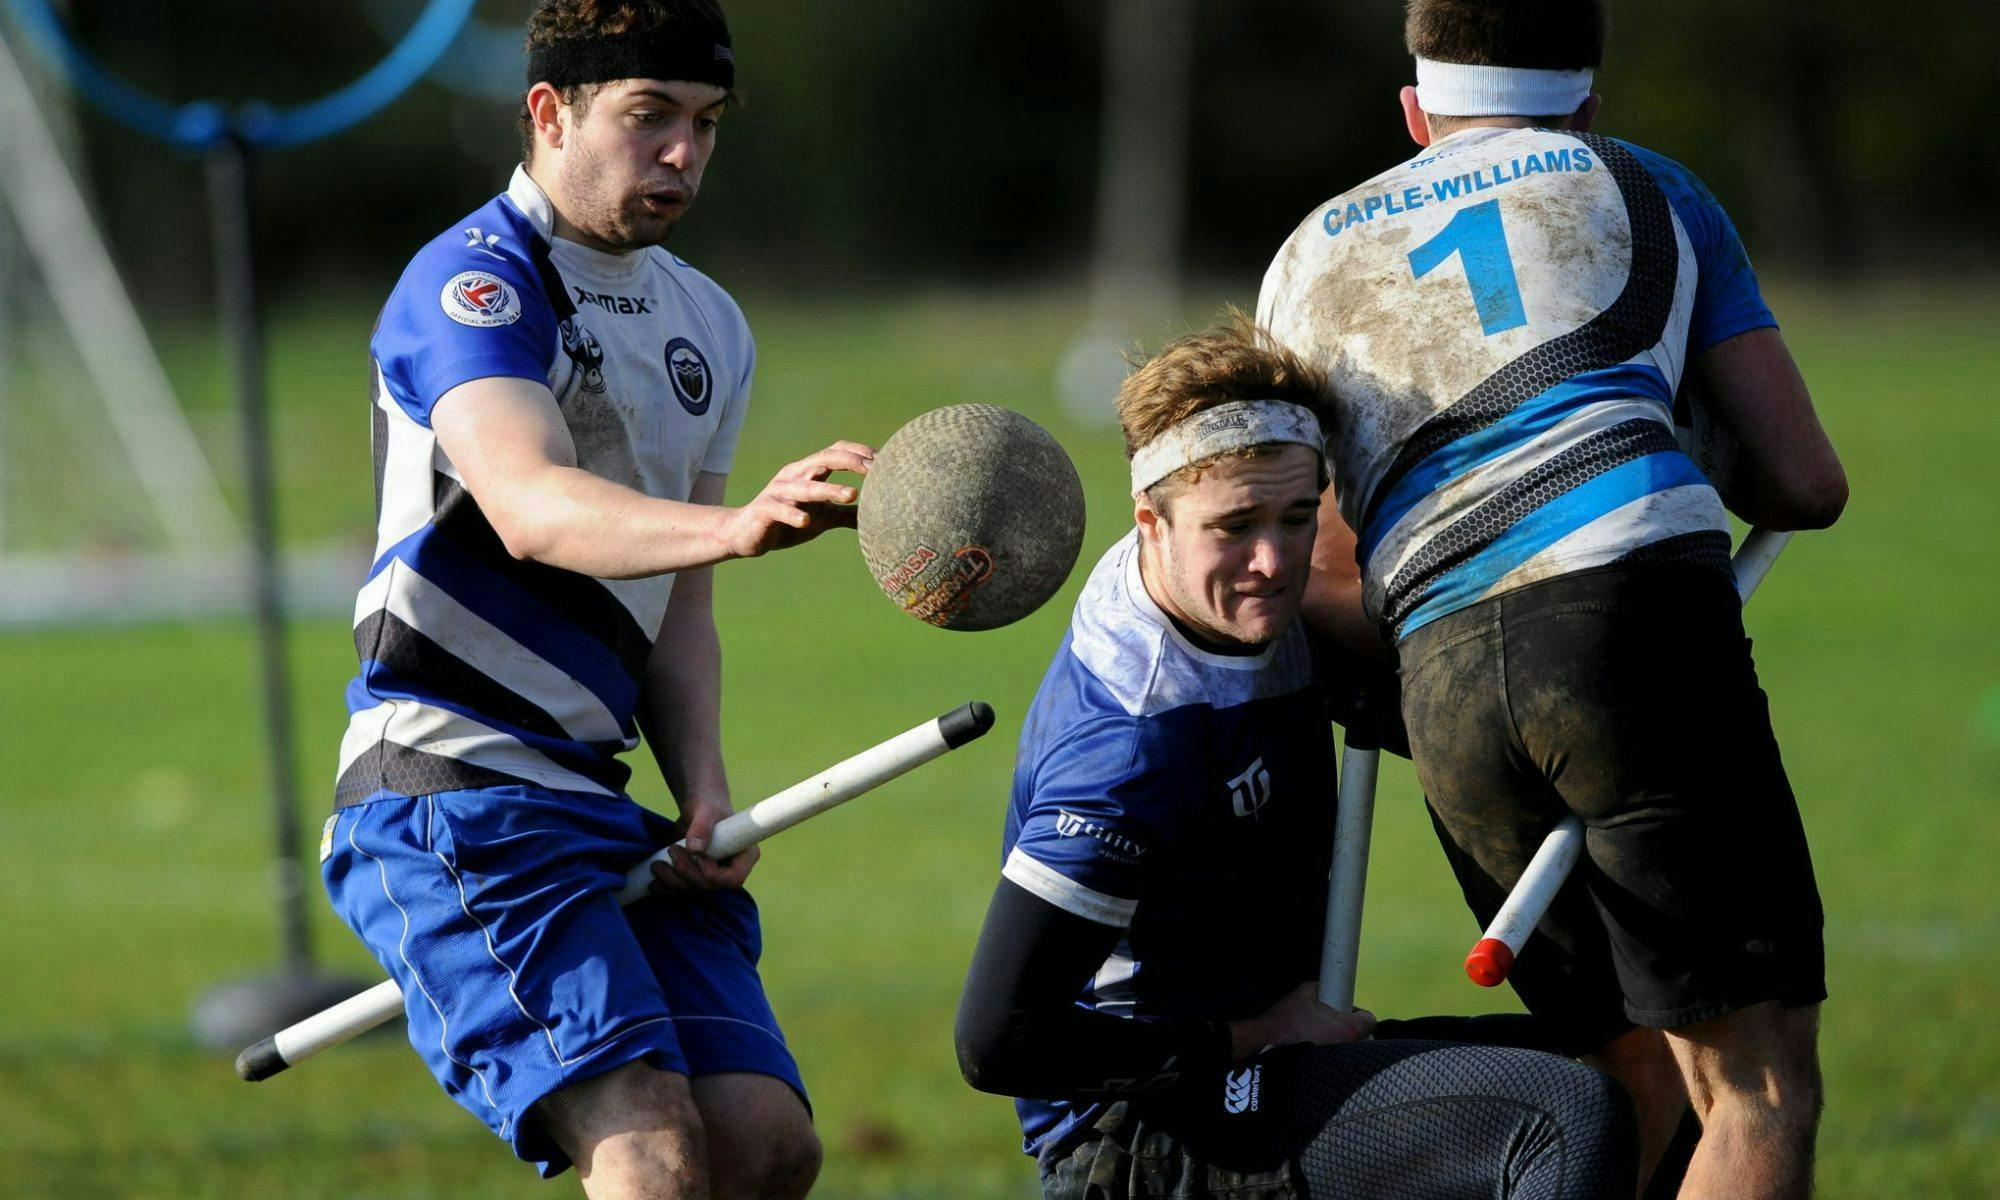 A chaser attempts to tackle a player while an opposing beater throws a bludger at them